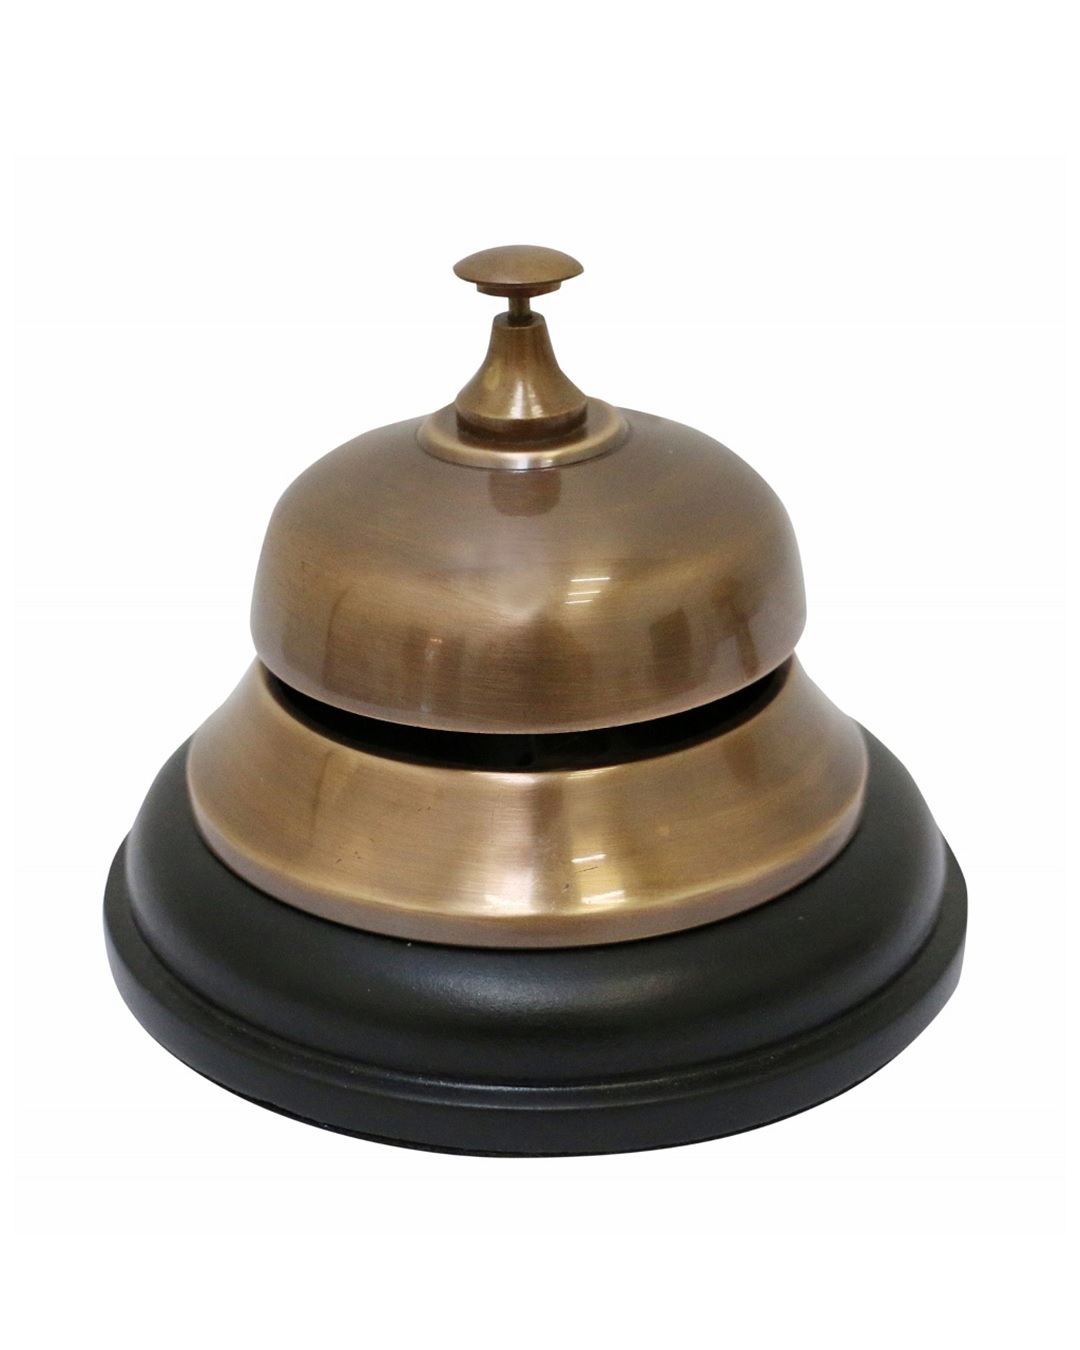 Brass table bell with black base.